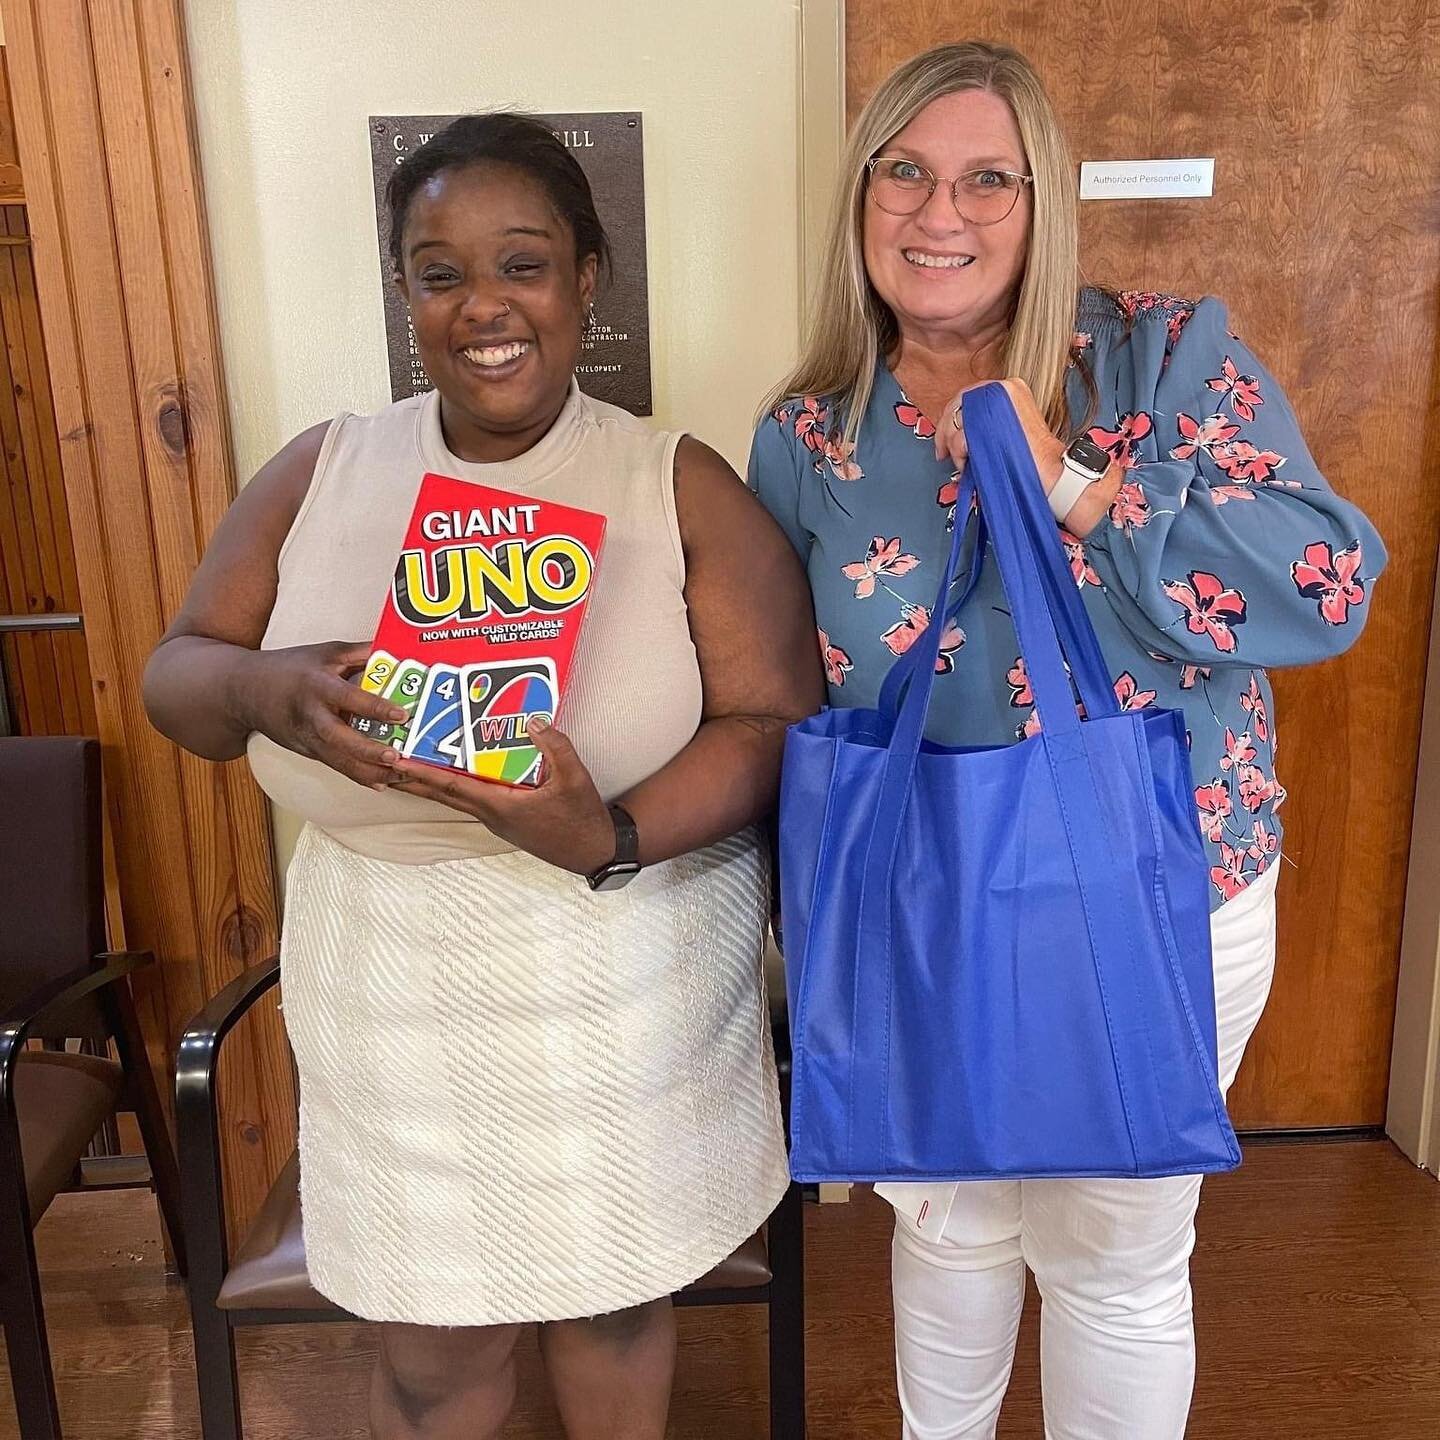 Today is National Senior Citizen Day! 😃

Our Impact Team delivered activity bags full of games, puzzles, and other fun activities to Belpre Senior Center, O'Neill Center, and Wood County Senior Citizens Association, Inc.! 

We are so appreciative of